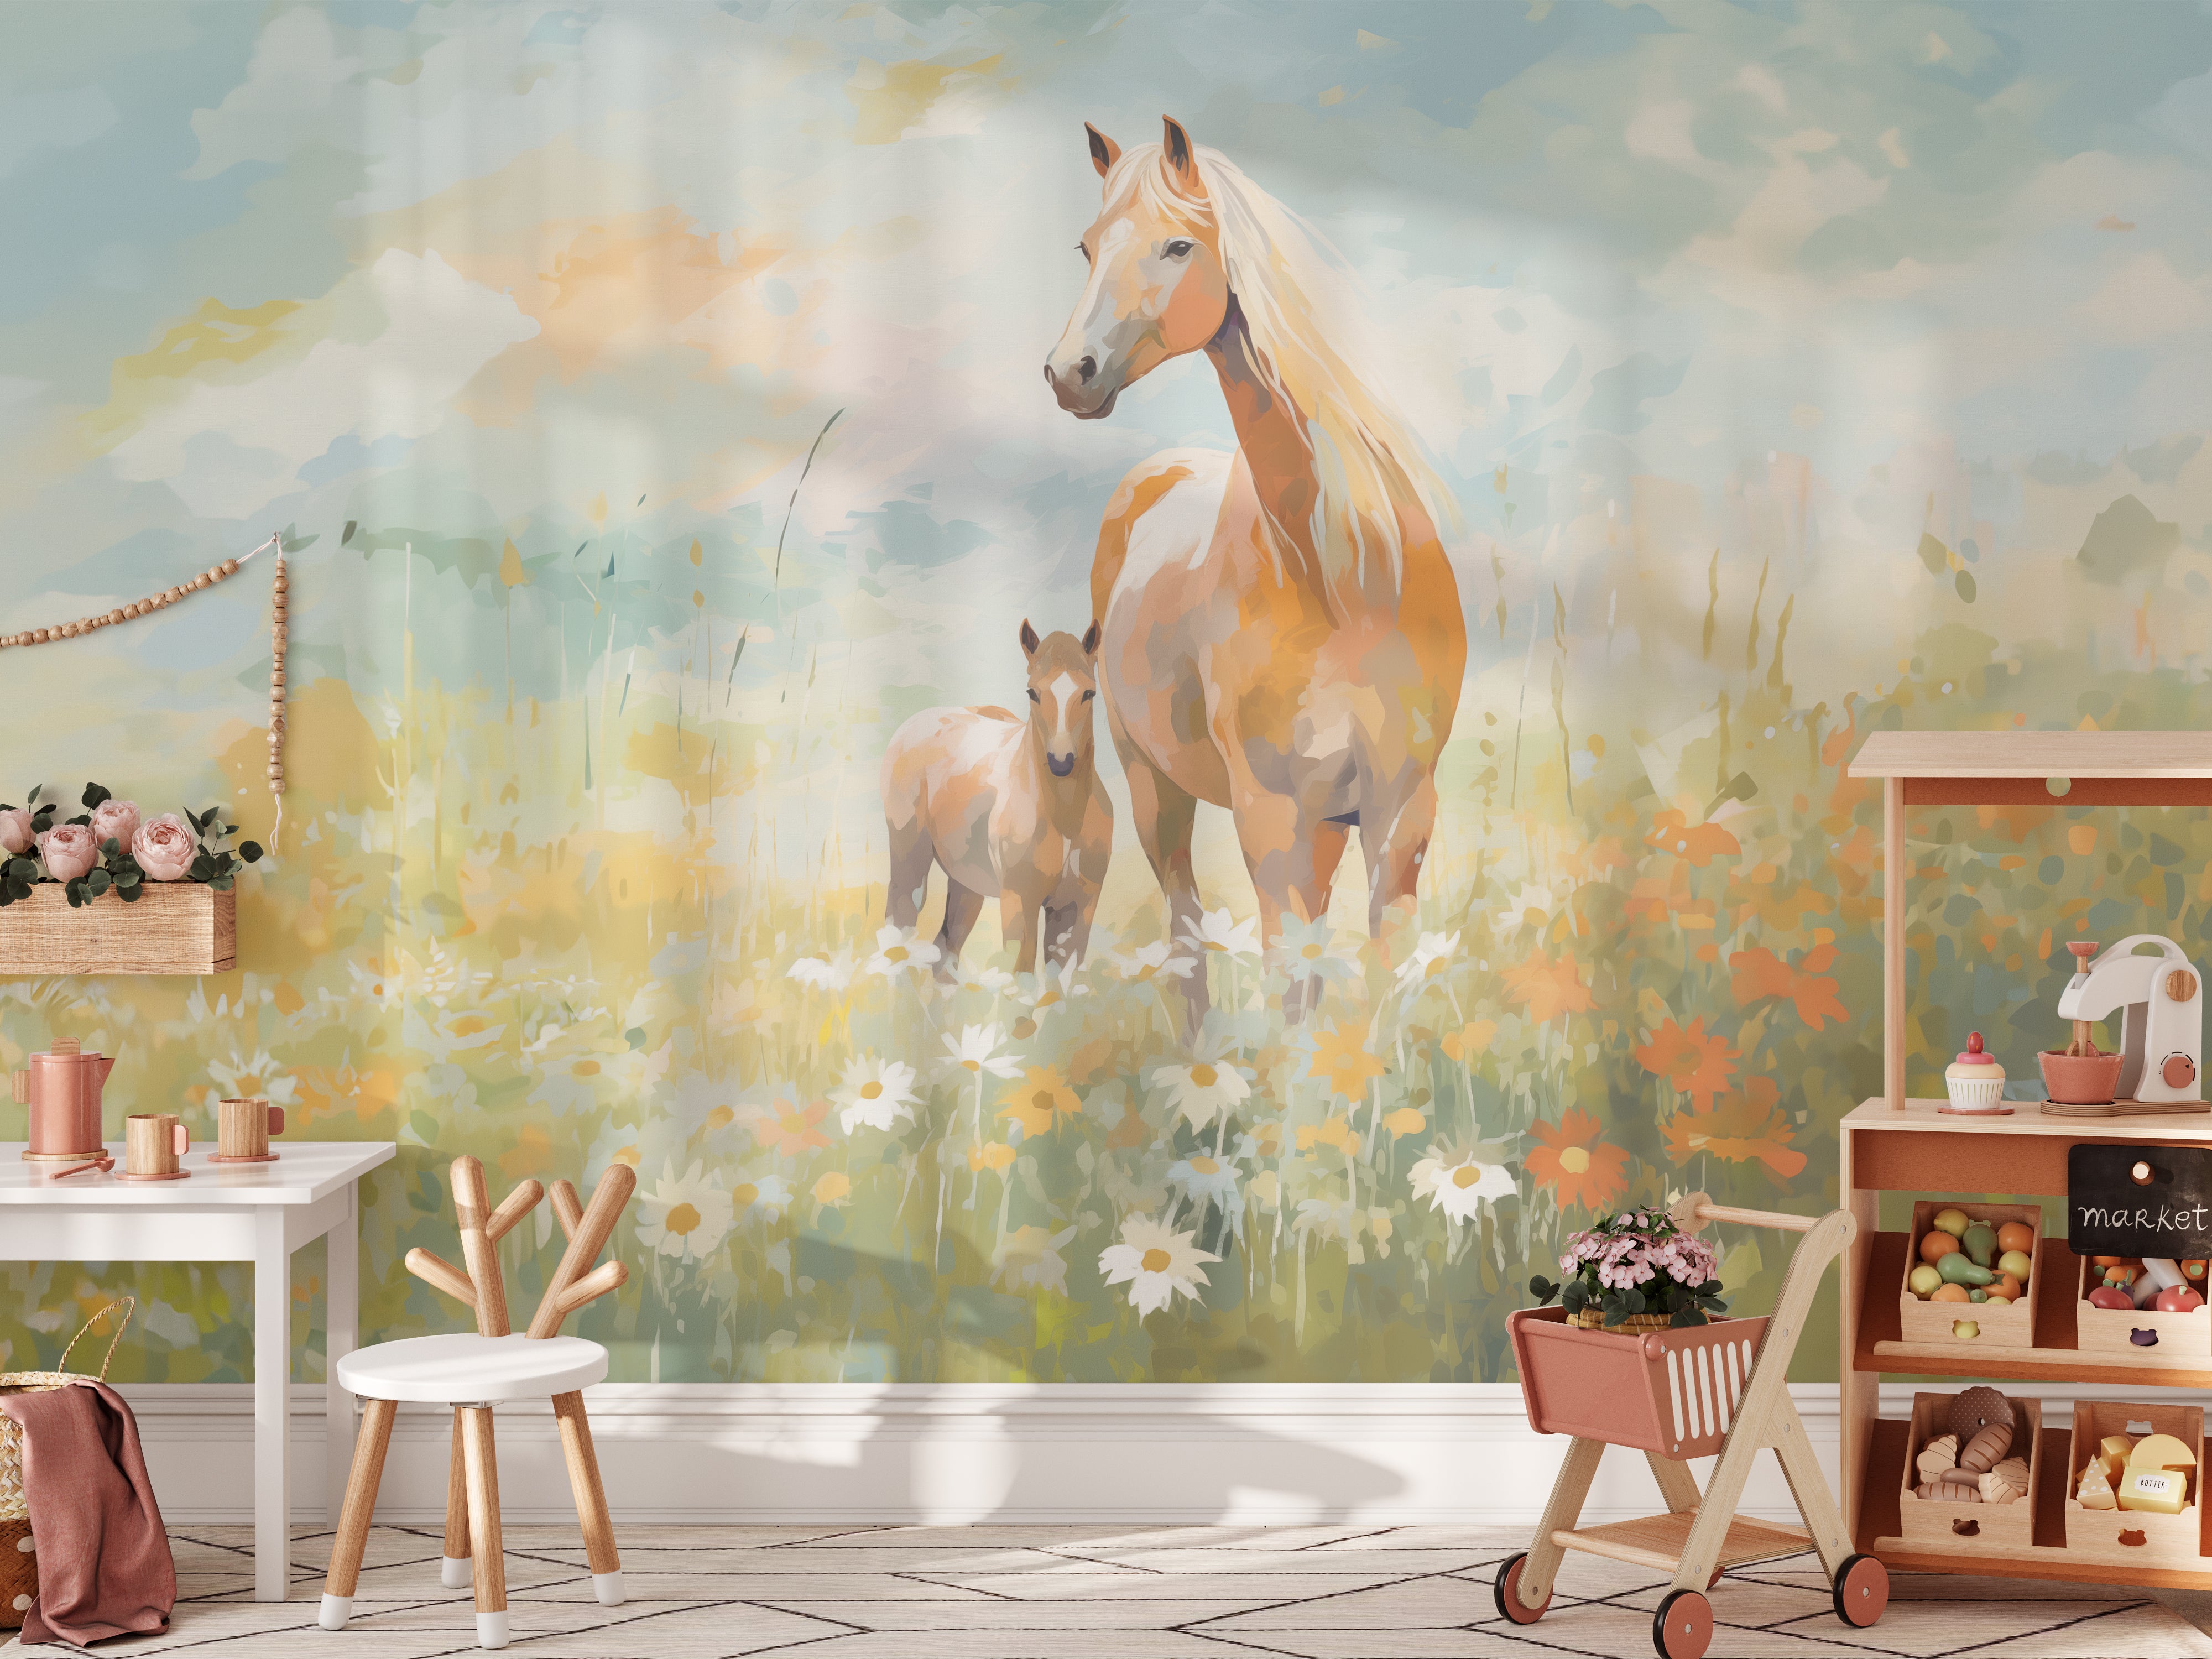 A large wall mural in a children's playroom depicting a gentle horse and its foal in a field of wildflowers, enhancing the room's bright and playful atmosphere